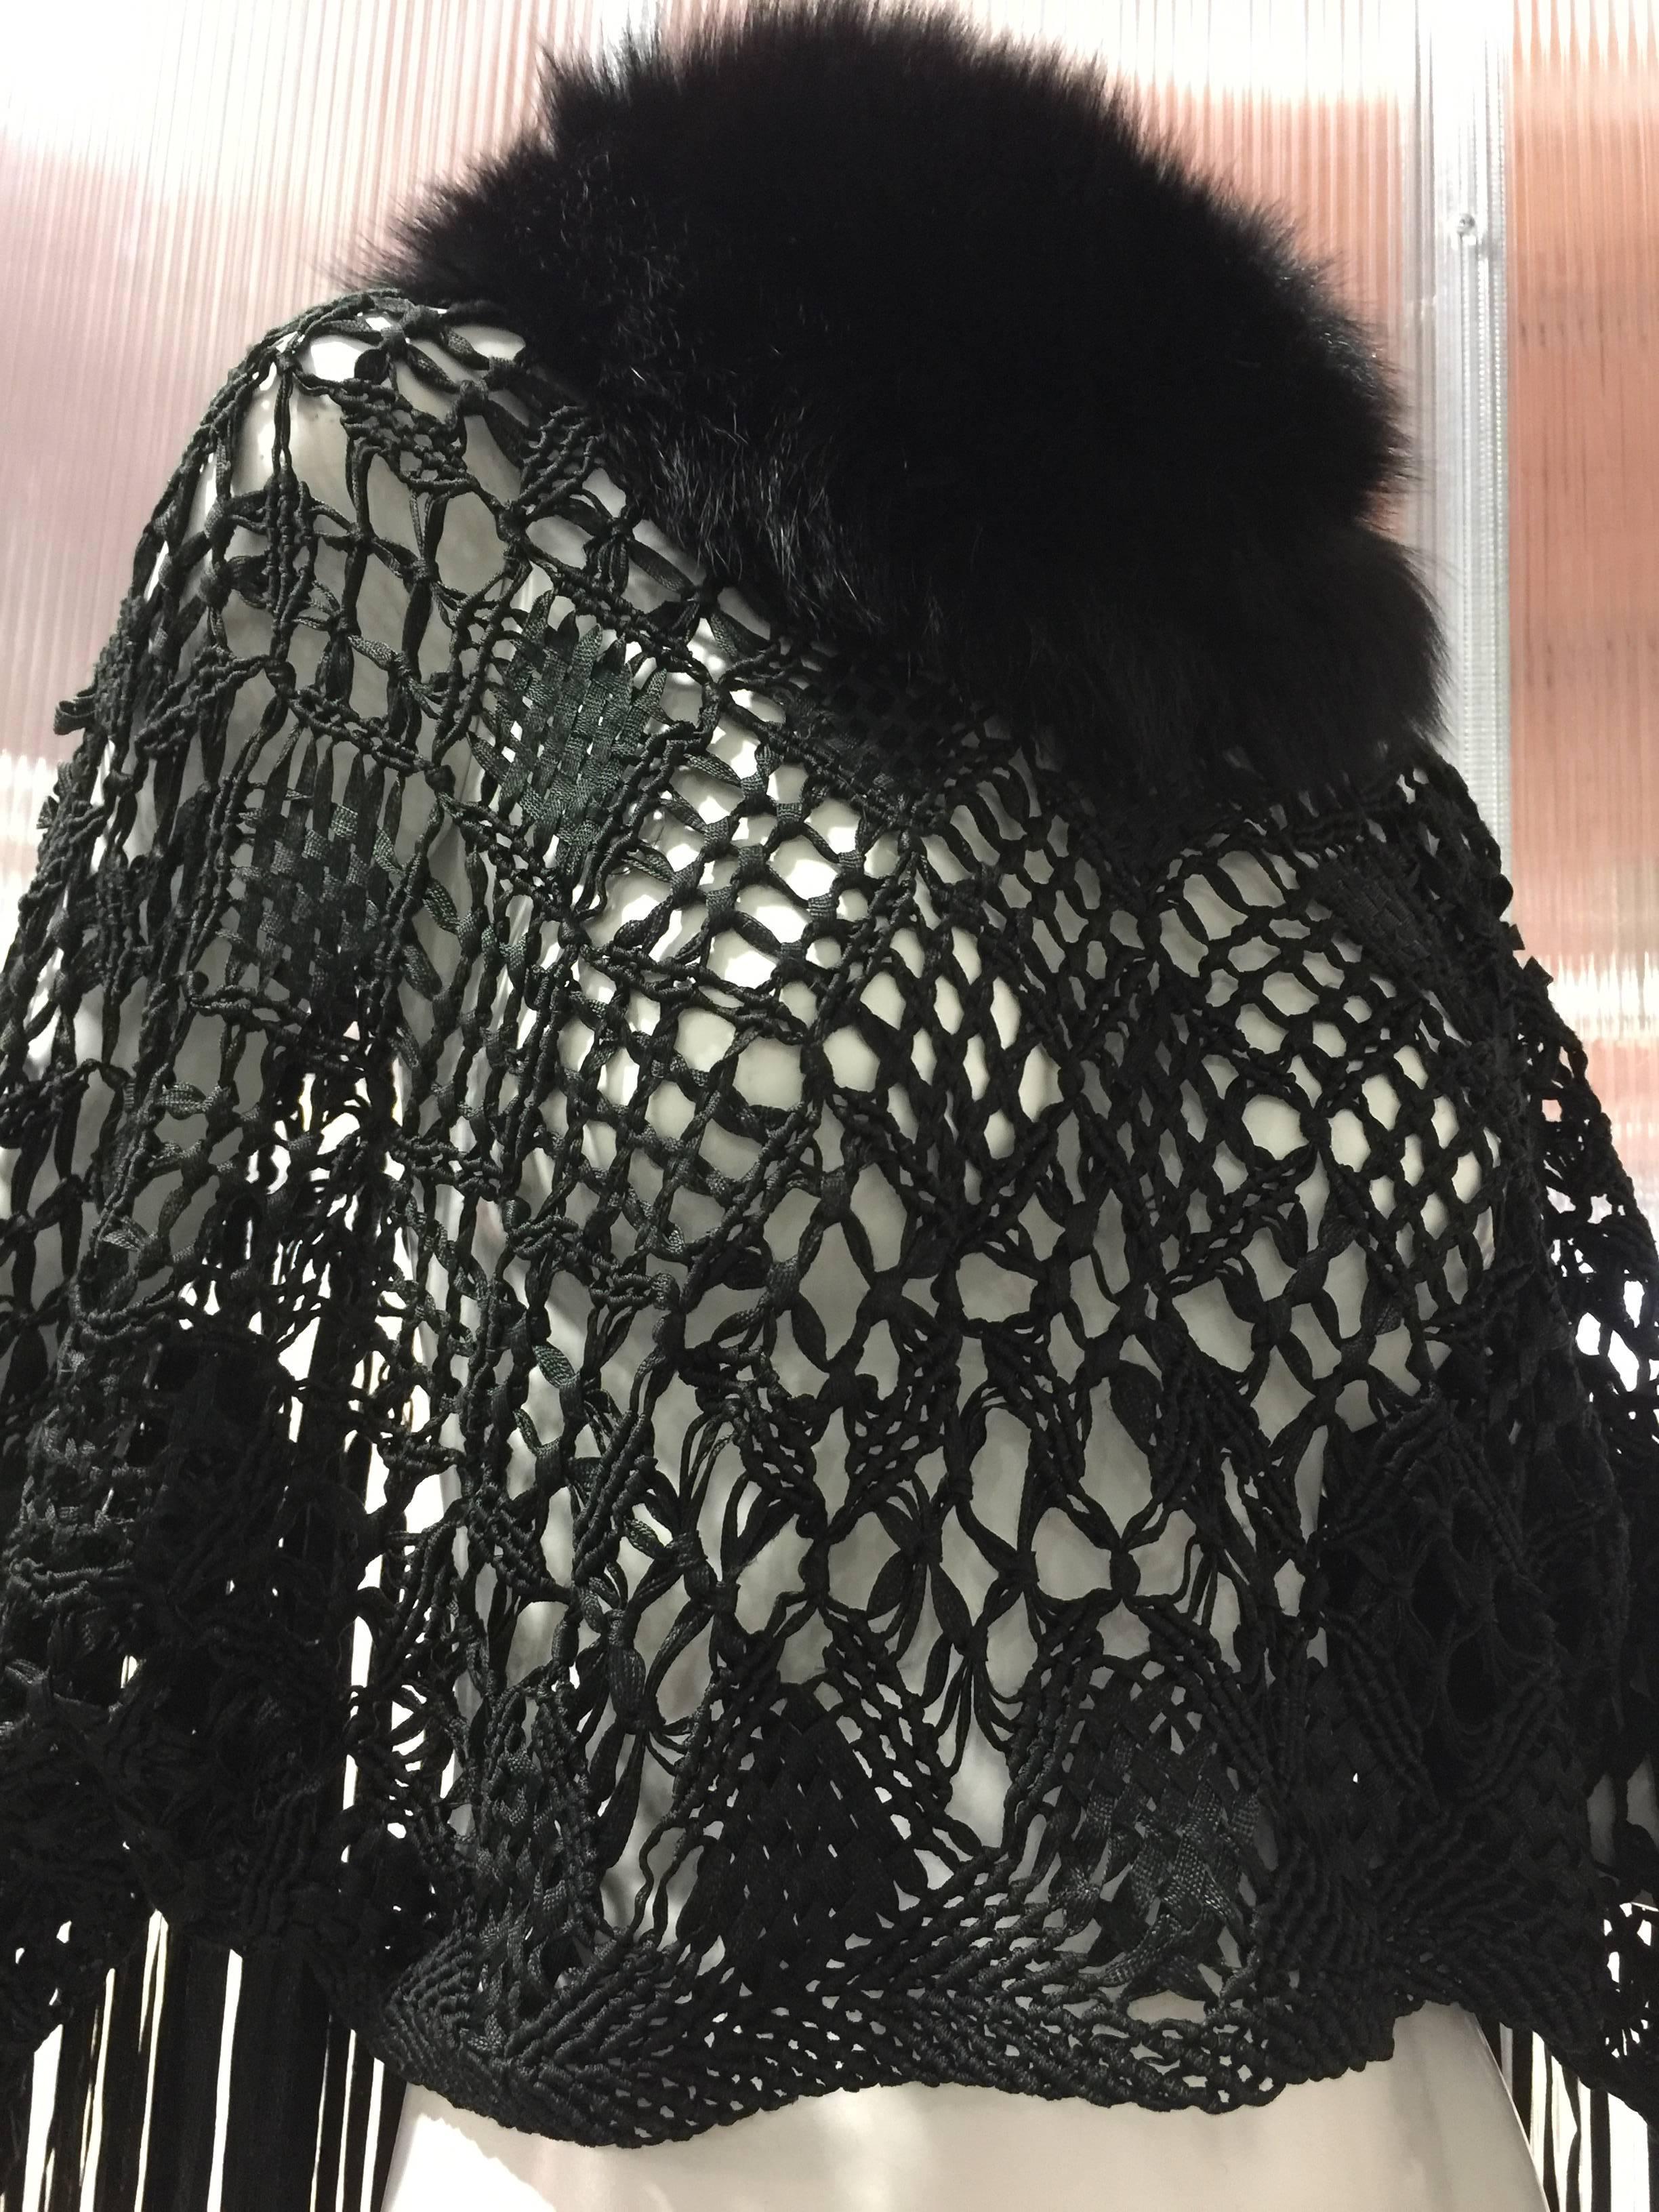 1970s black silk ribbon macrame and fringed cropped poncho is made to slip over the head and arms. Fluffy black fox fur tightly surrounds the neck for warmth and arms slide thru the poncho for movement allowing the fringe to sway about freely. A